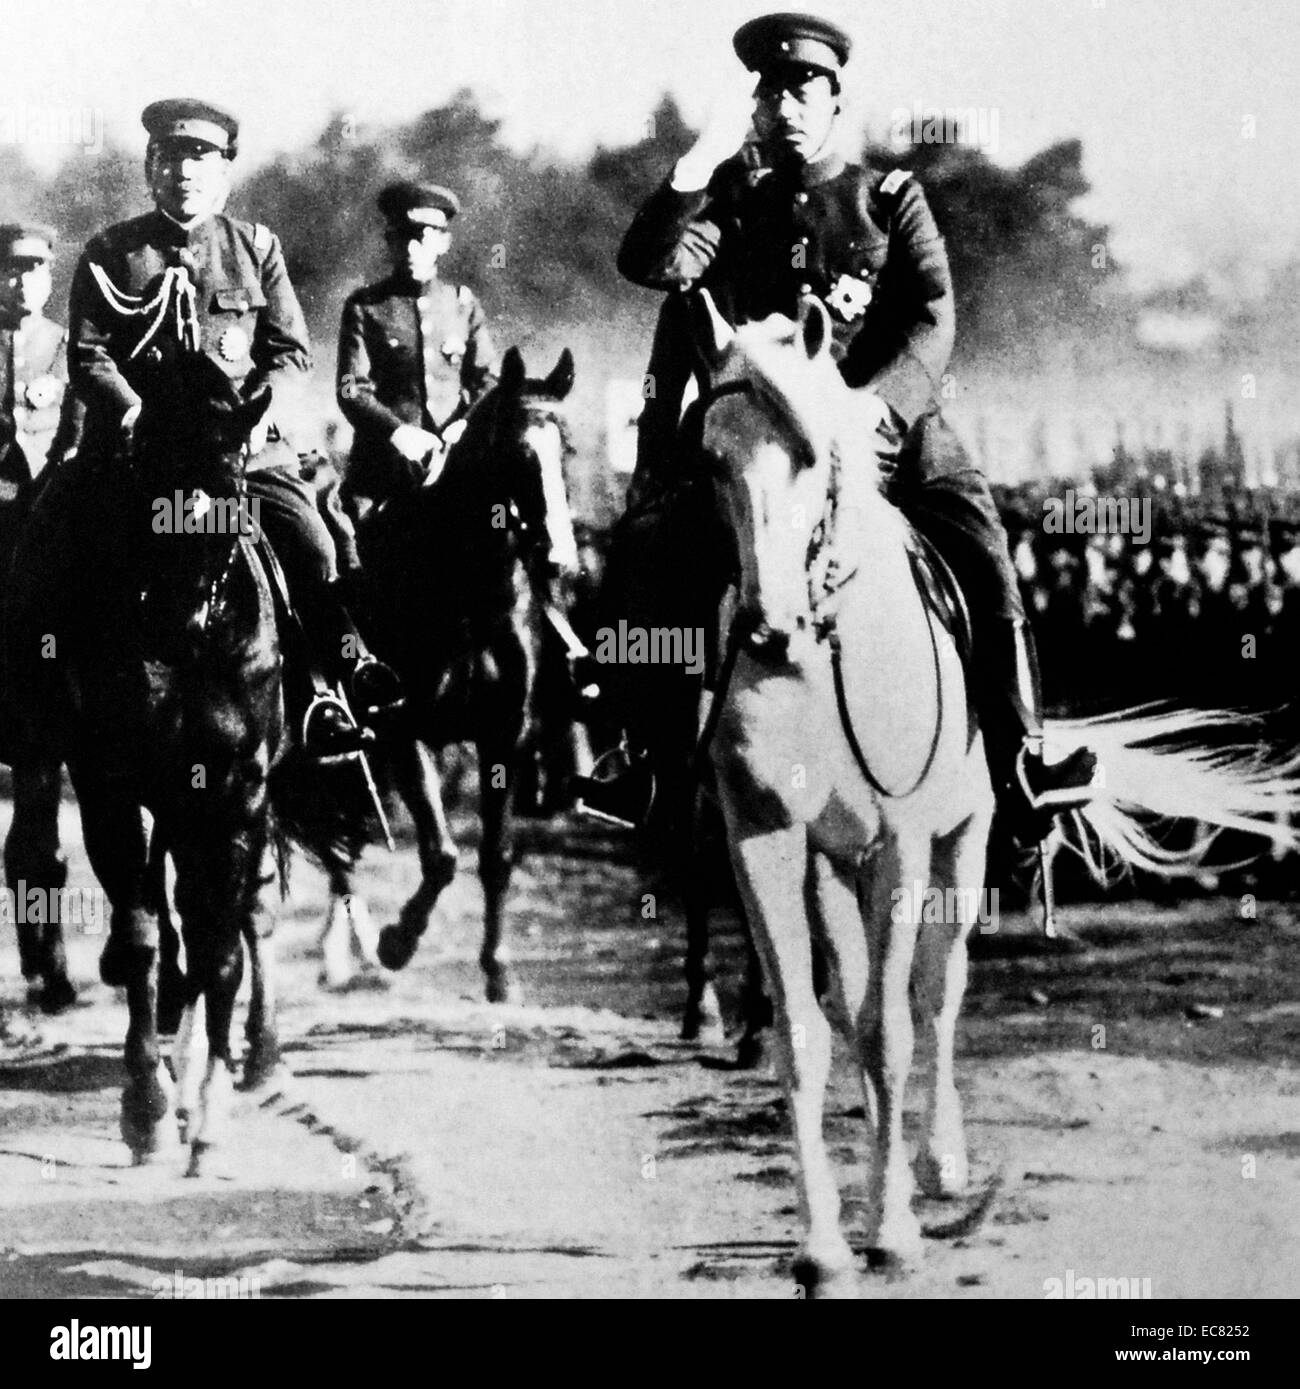 Image of Emperor Hirohito (Emperor Showa) riding his horse during an army inspection. He was the Emperor of Japan from 25th of December 1926 Until his death in 1989. Image taken around 1938. Stock Photo